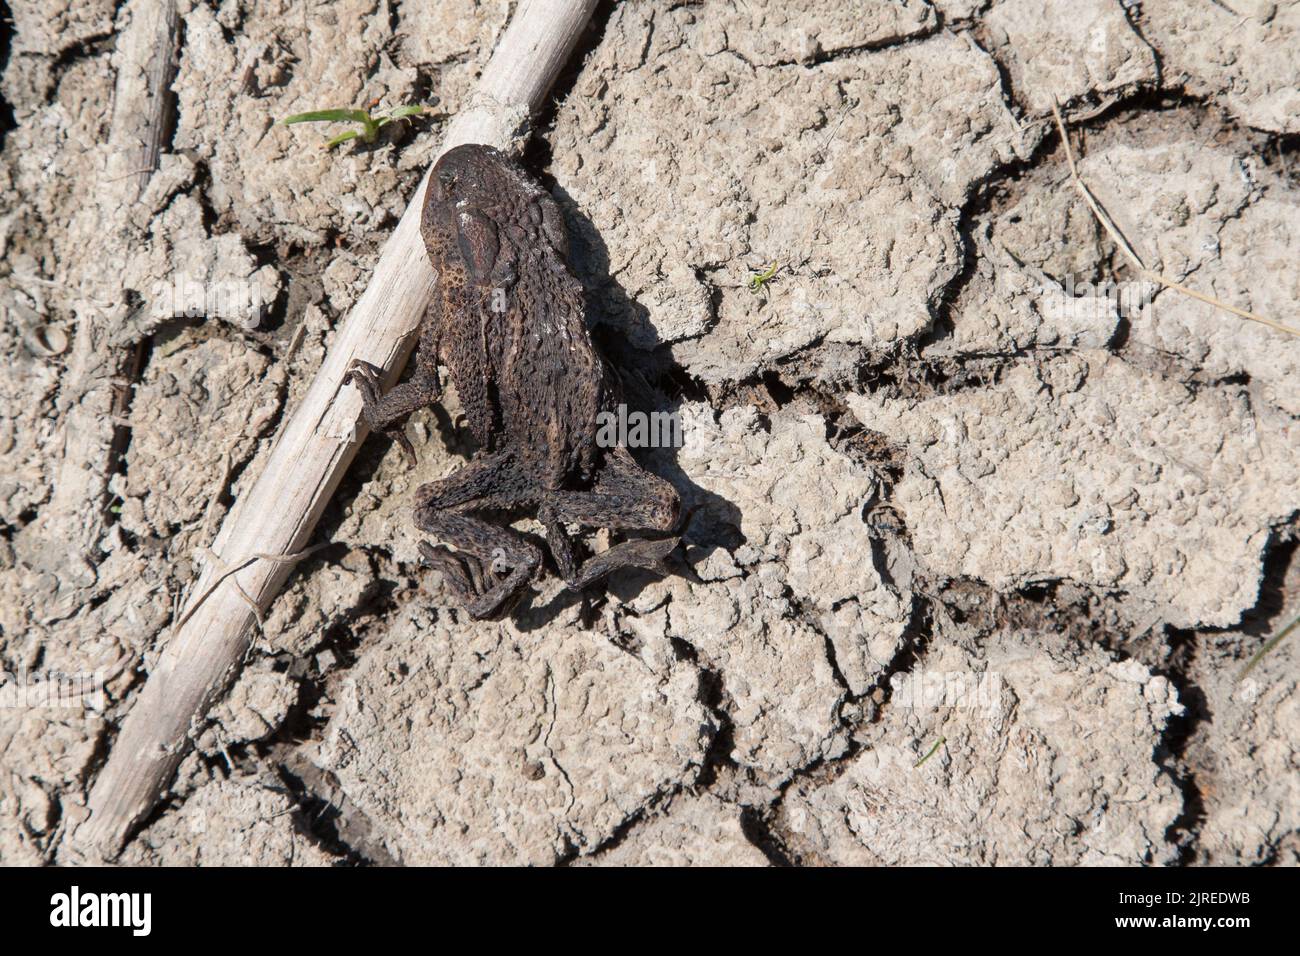 She still clings to a reed, a dried up toad on the cracked bottom of the dry pond. Climate change with its persistent drought is causing problems for Stock Photo